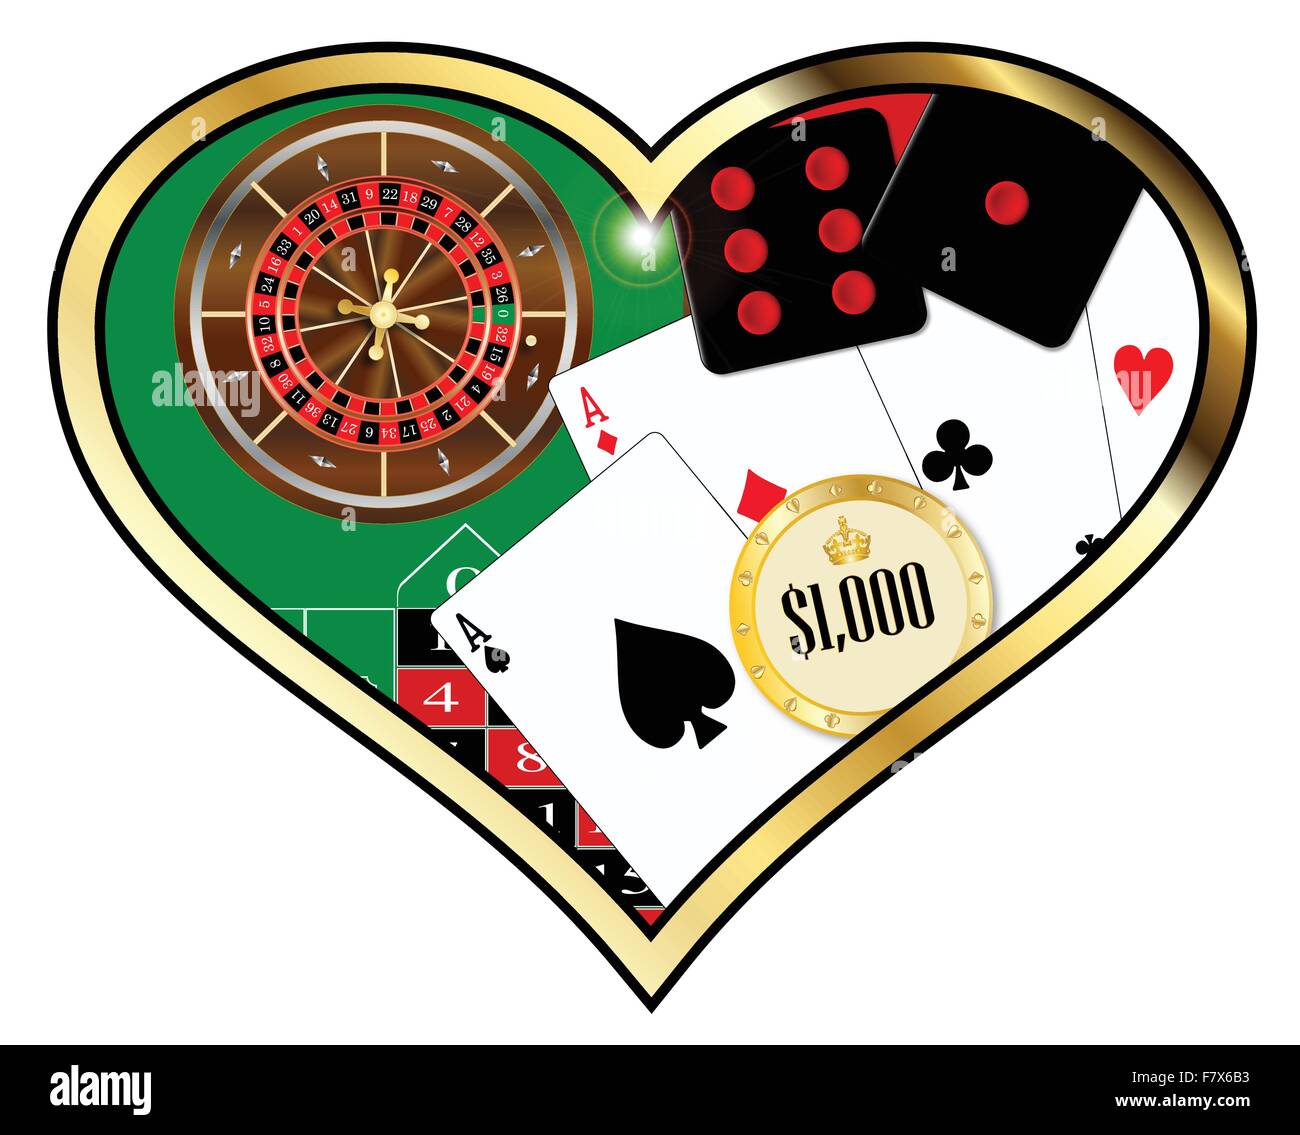 A typical American roulette table layout with cards and dice over a white background Stock Vector